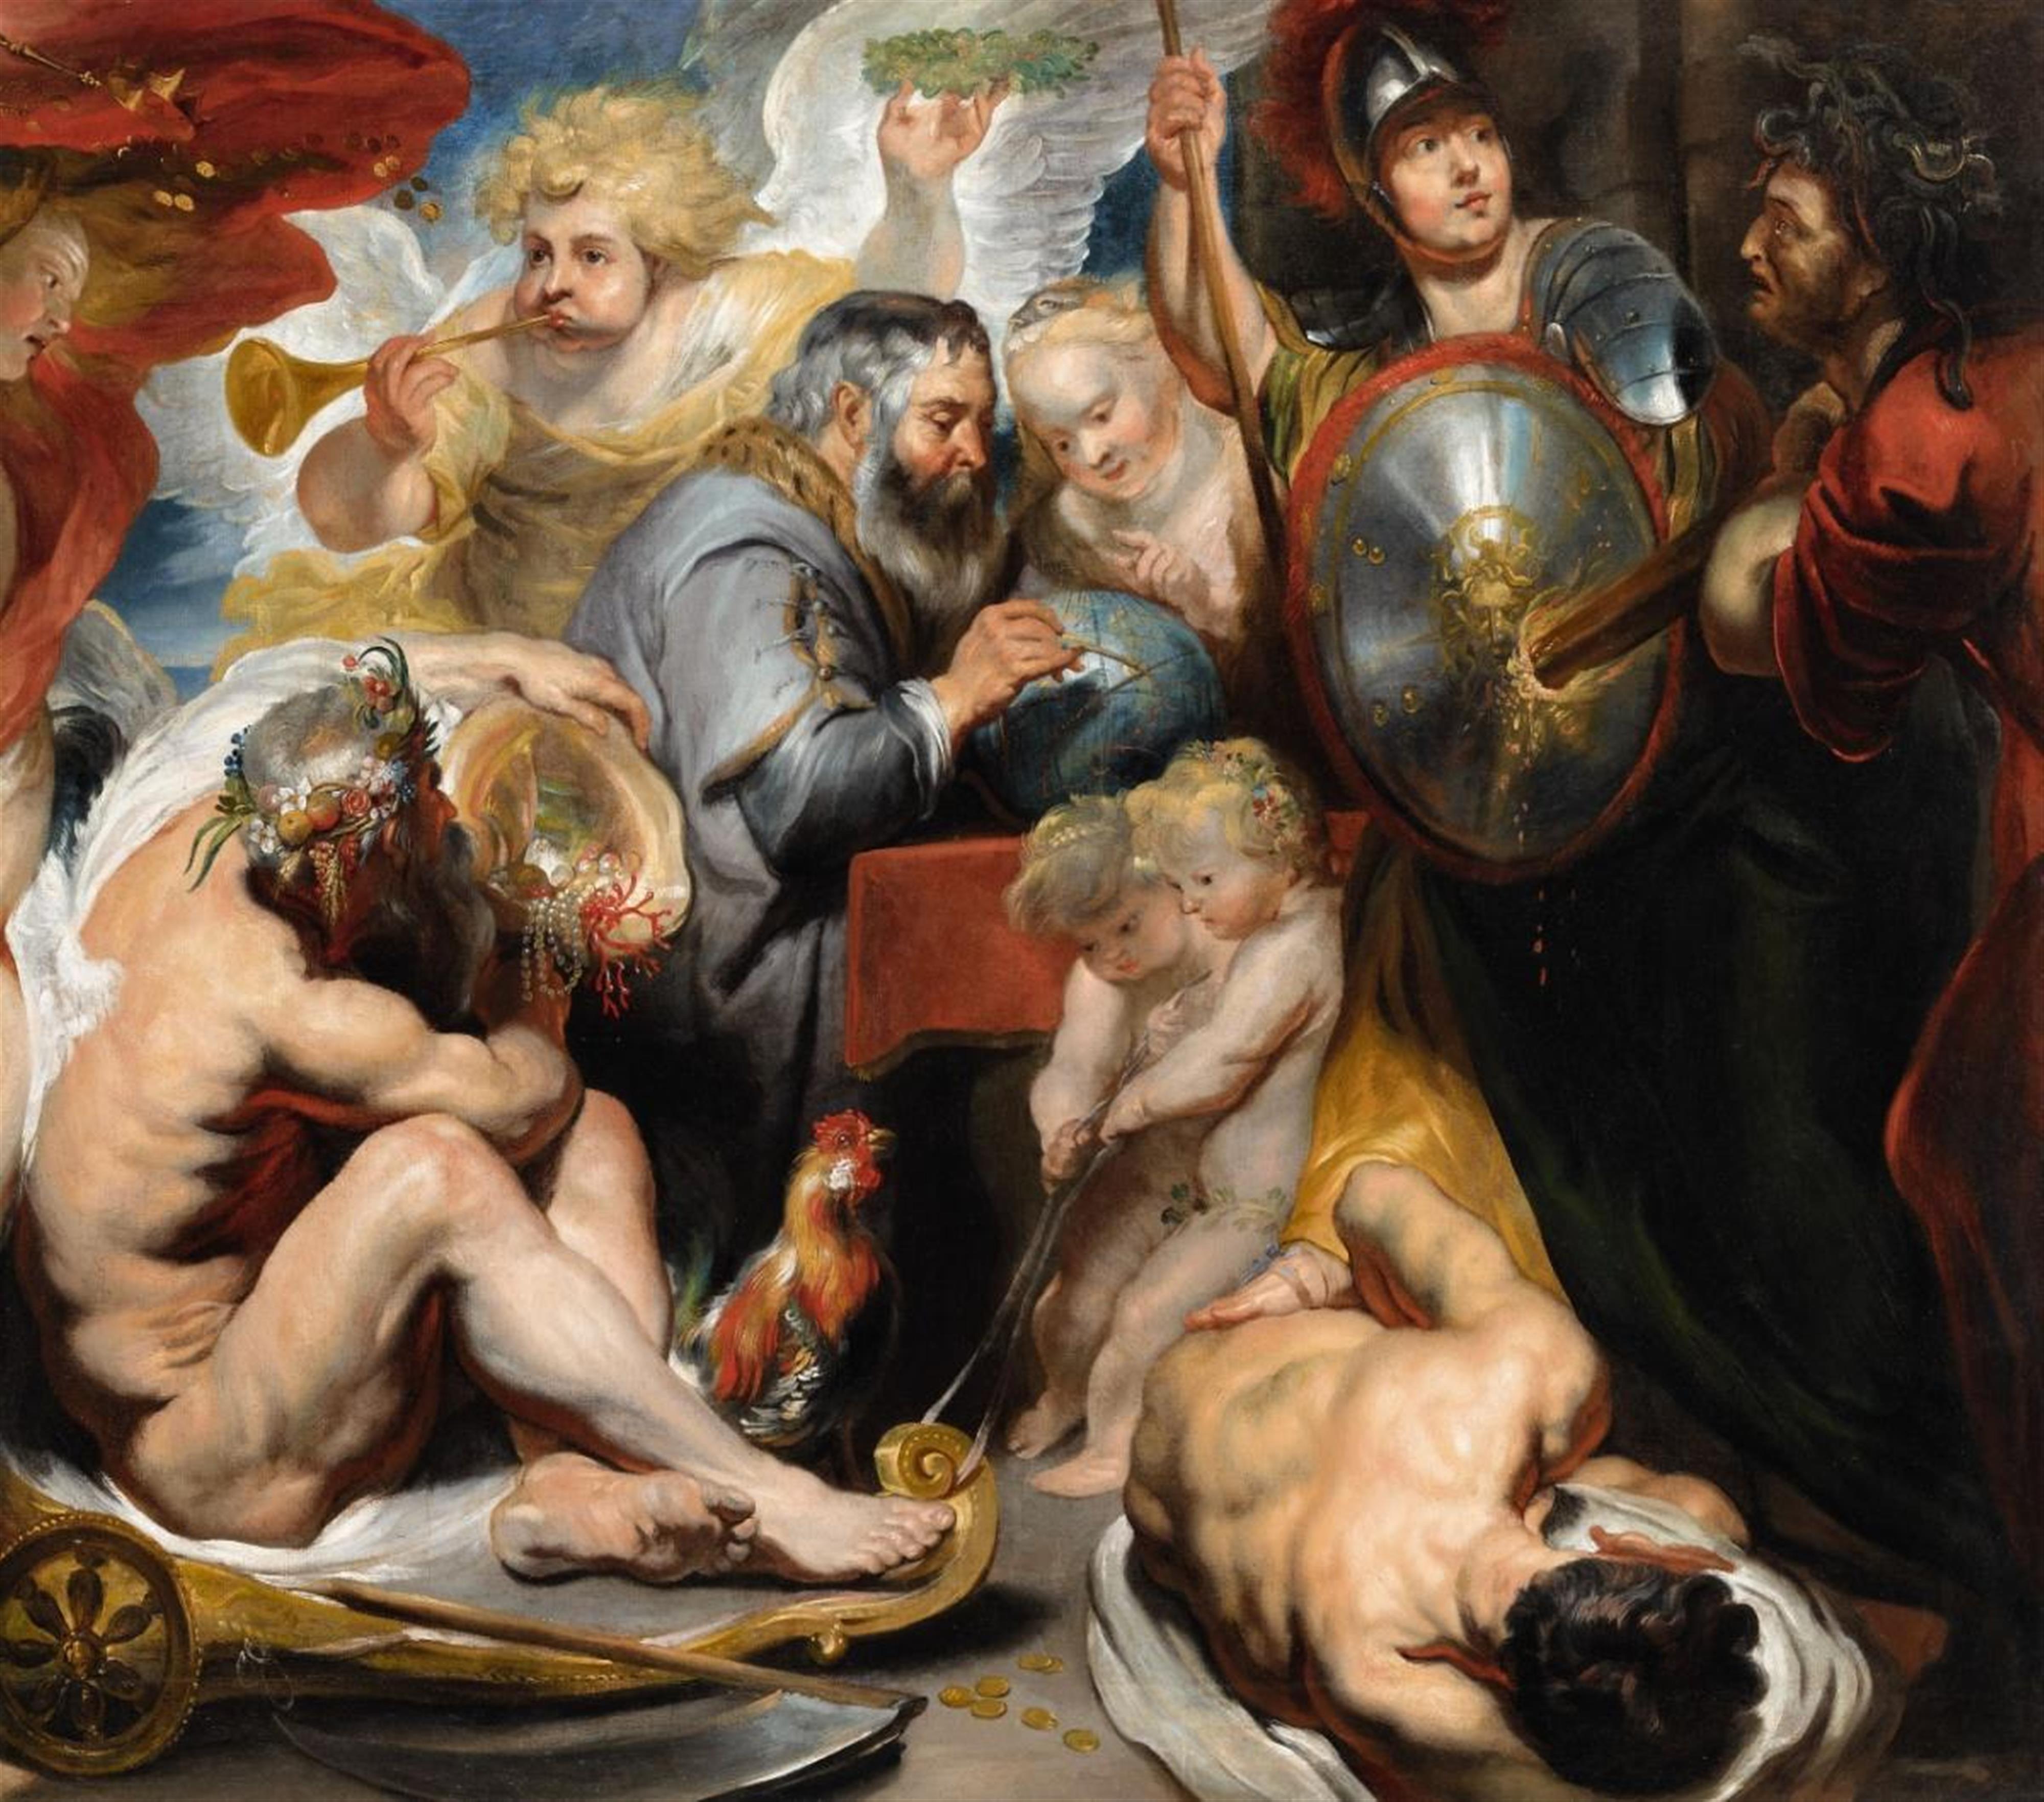 Jacob Jordaens, attributed to - Allegory of the Sciences: Minerva and Chronos Protecting the Sciences against Envy and Ignorance - image-1